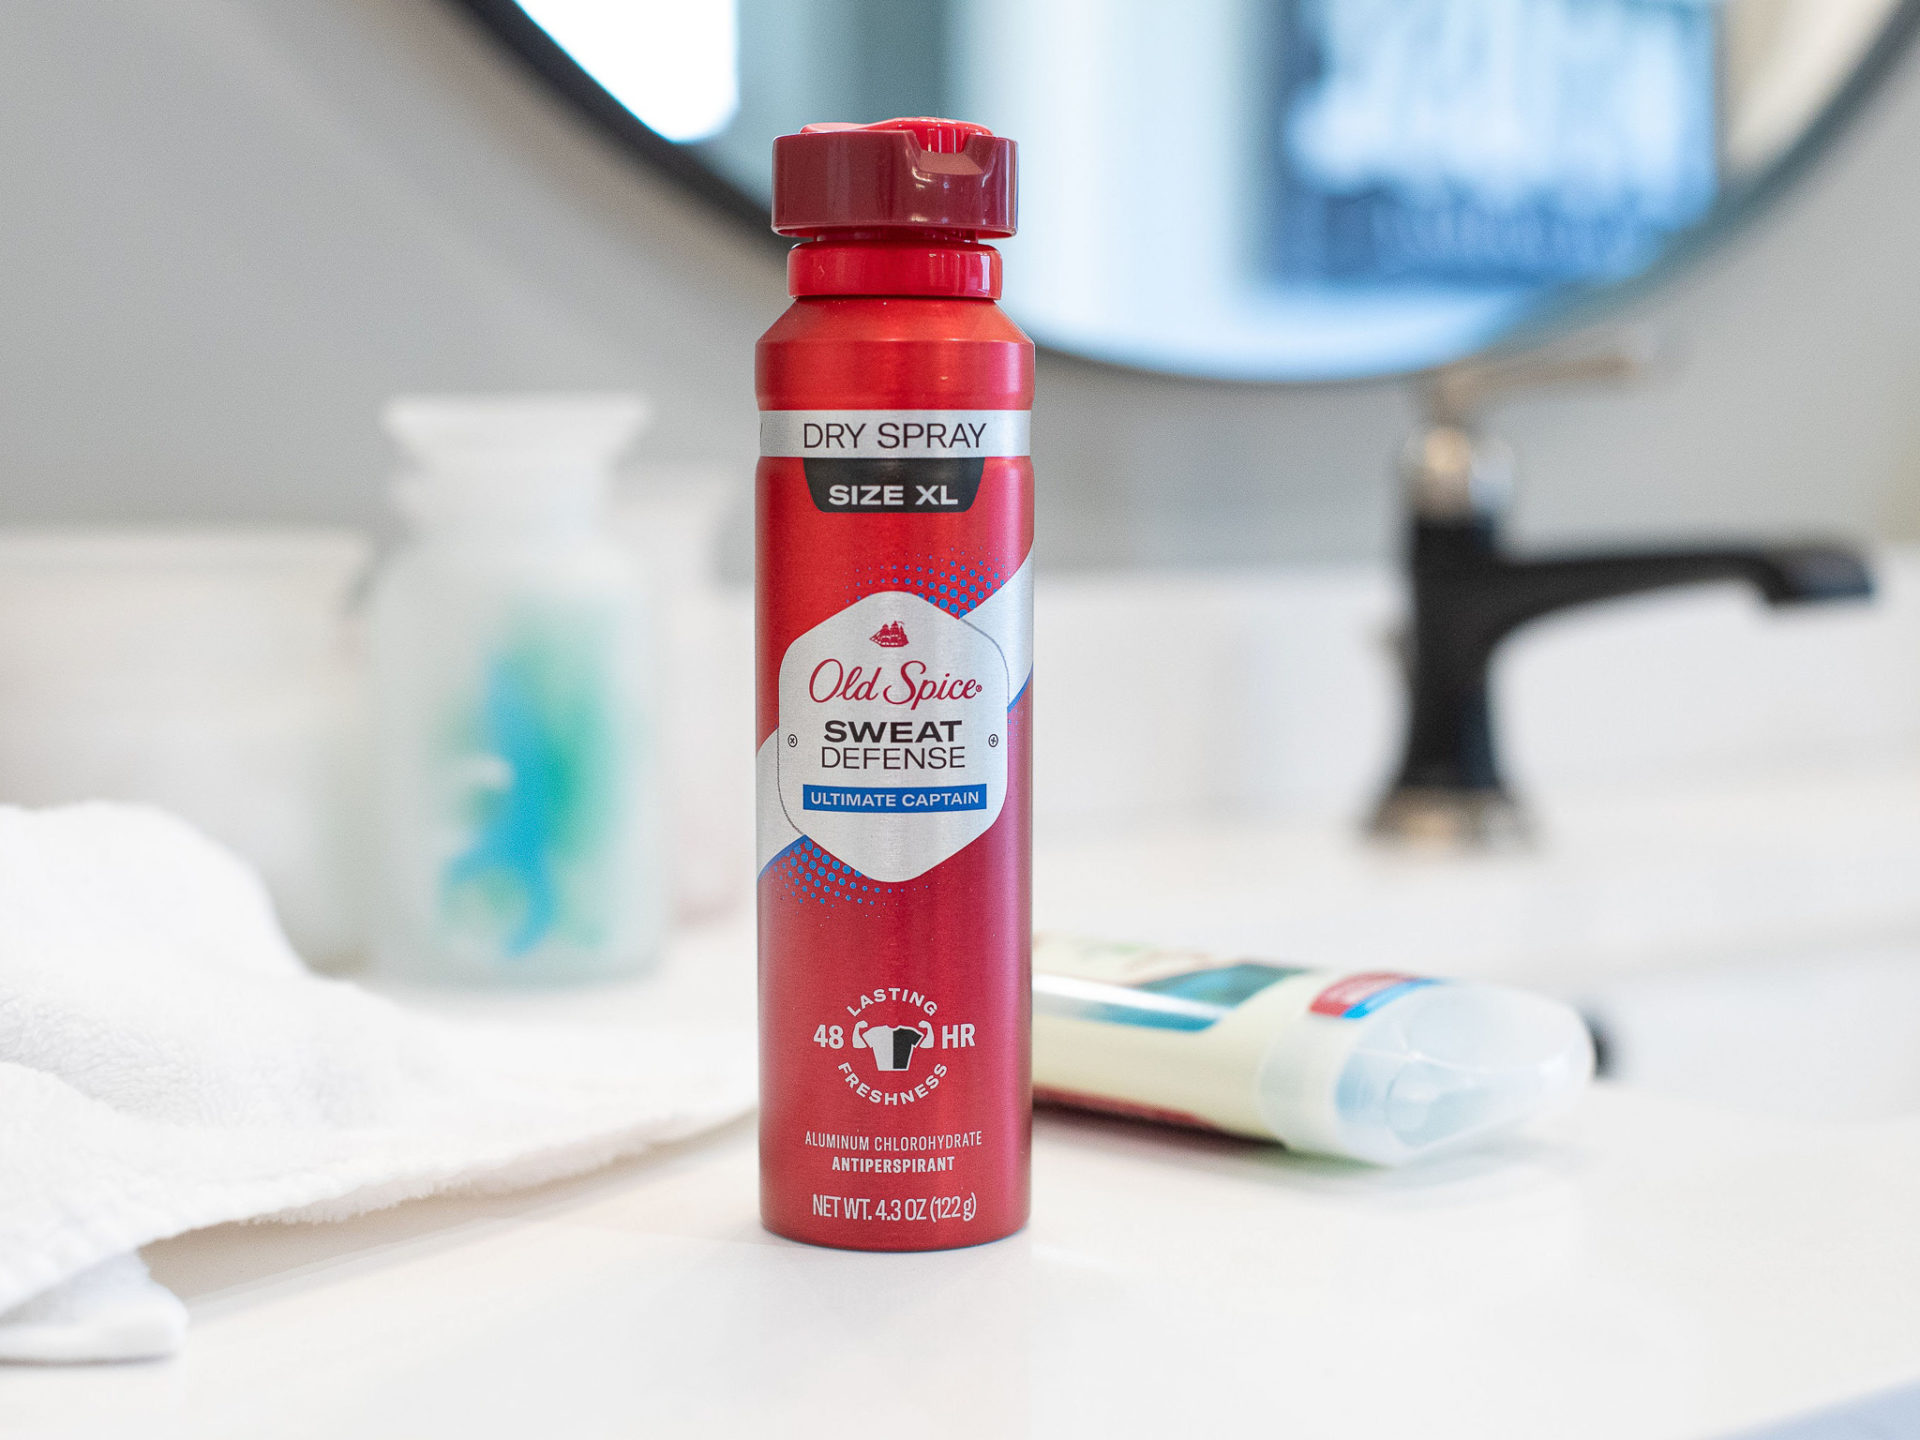 Old Spice Body Spray As Low As $2.49 At Kroger (Plus Cheap Dry Spray)